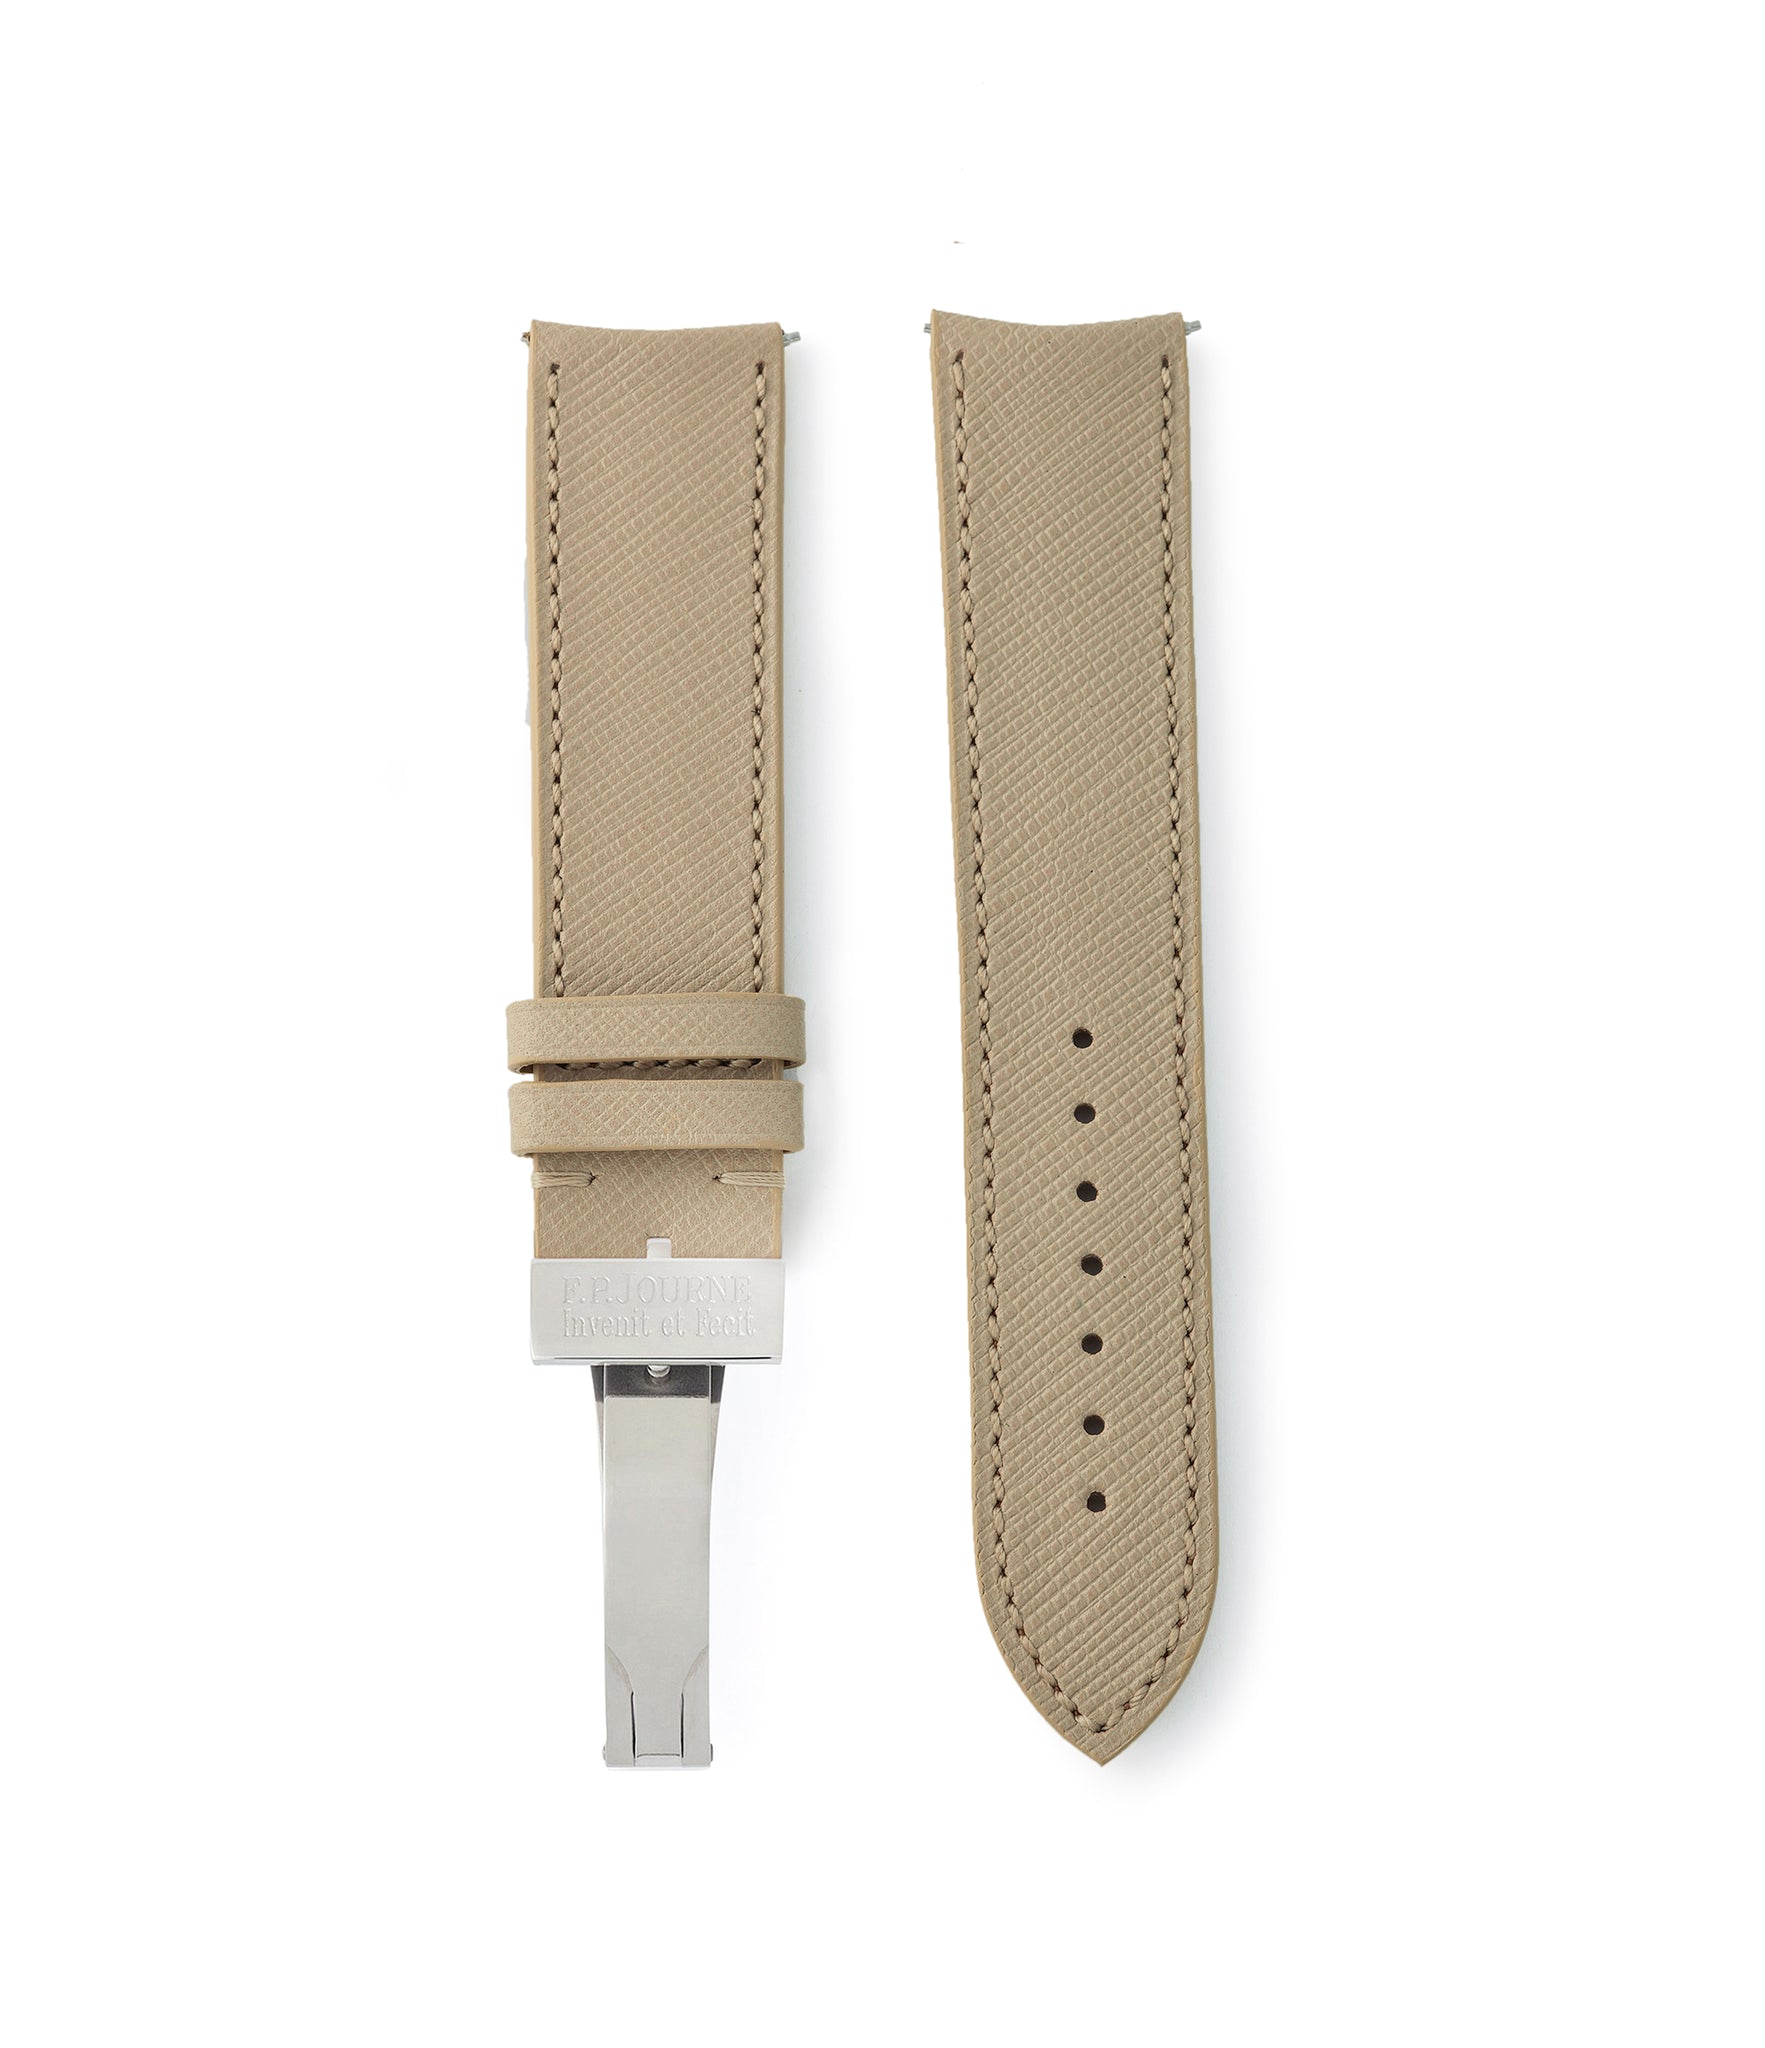 Buy 20mm x 19mm Sardegna Molequin F. P. Journe curved watch strap Saffiano cream calfskin leather quick-release springbars buckle handcrafted European-made for sale online at A Collected Man London